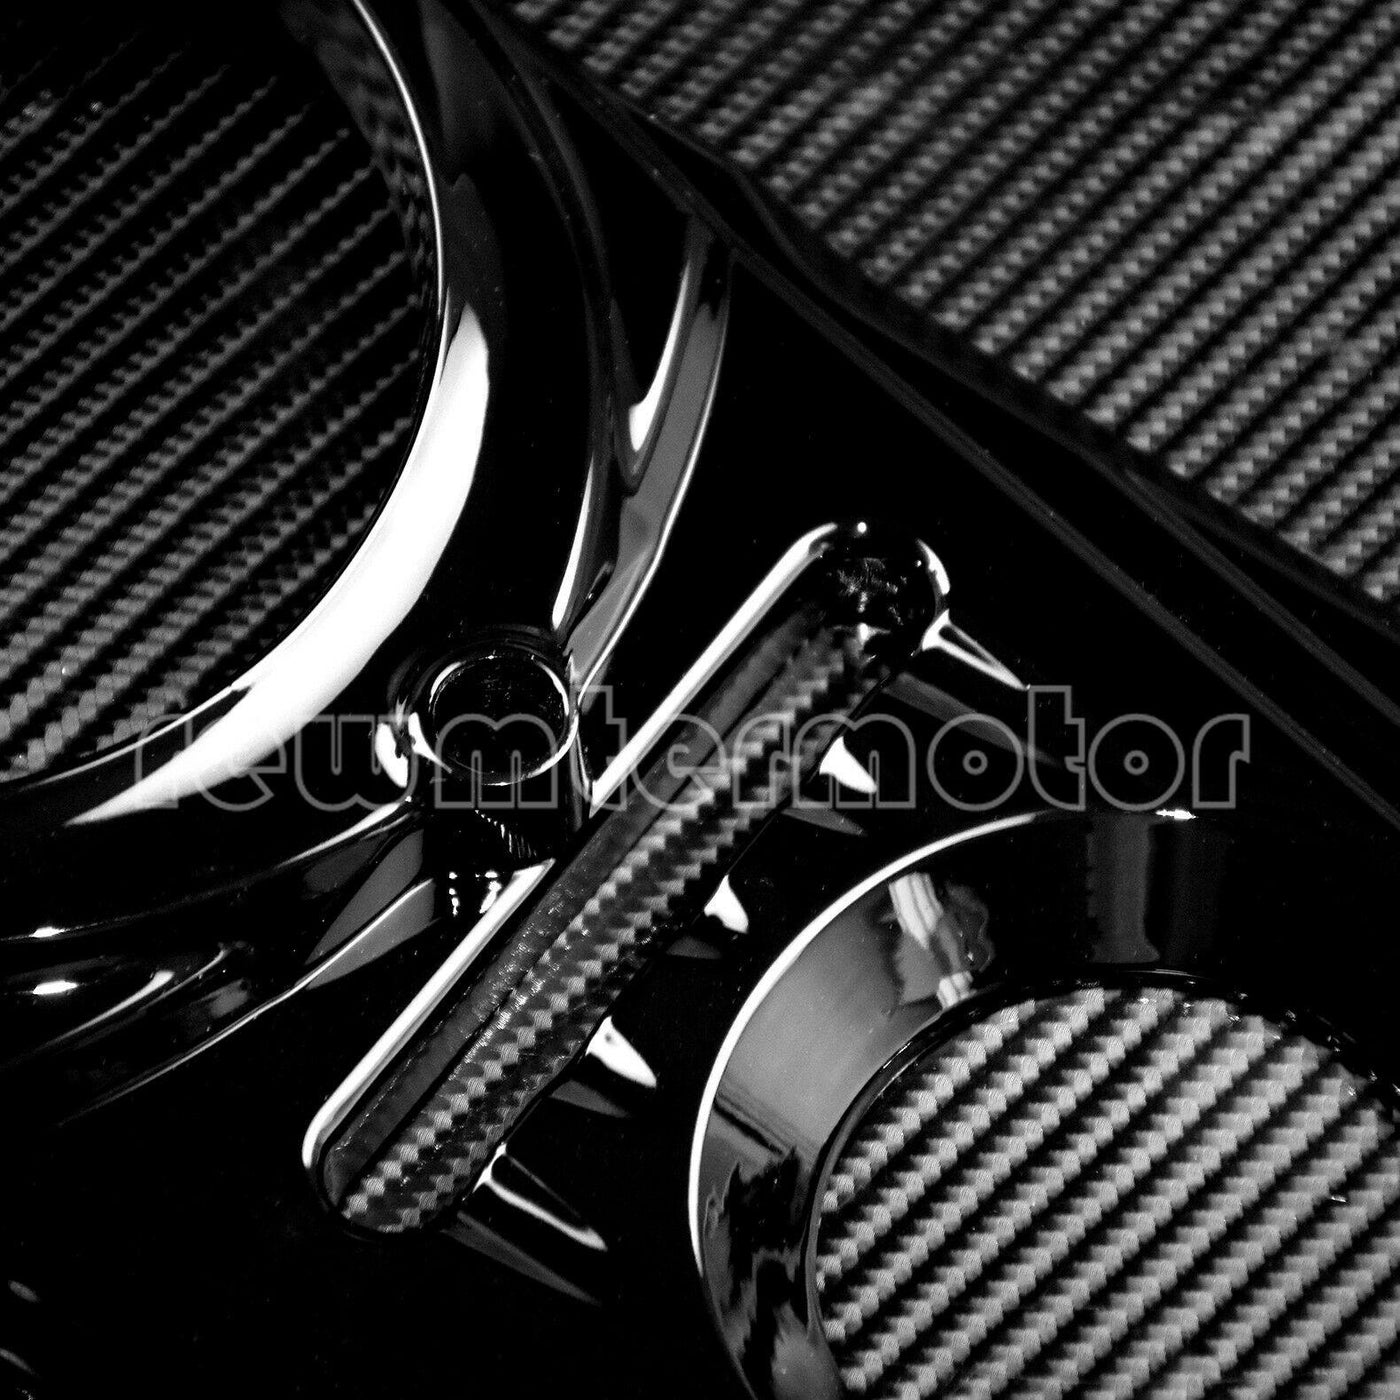 Dash Panel Insert Cover Fit For Harley Softail Dyna FXDWG FXSTC 1993-2015 Black - Moto Life Products